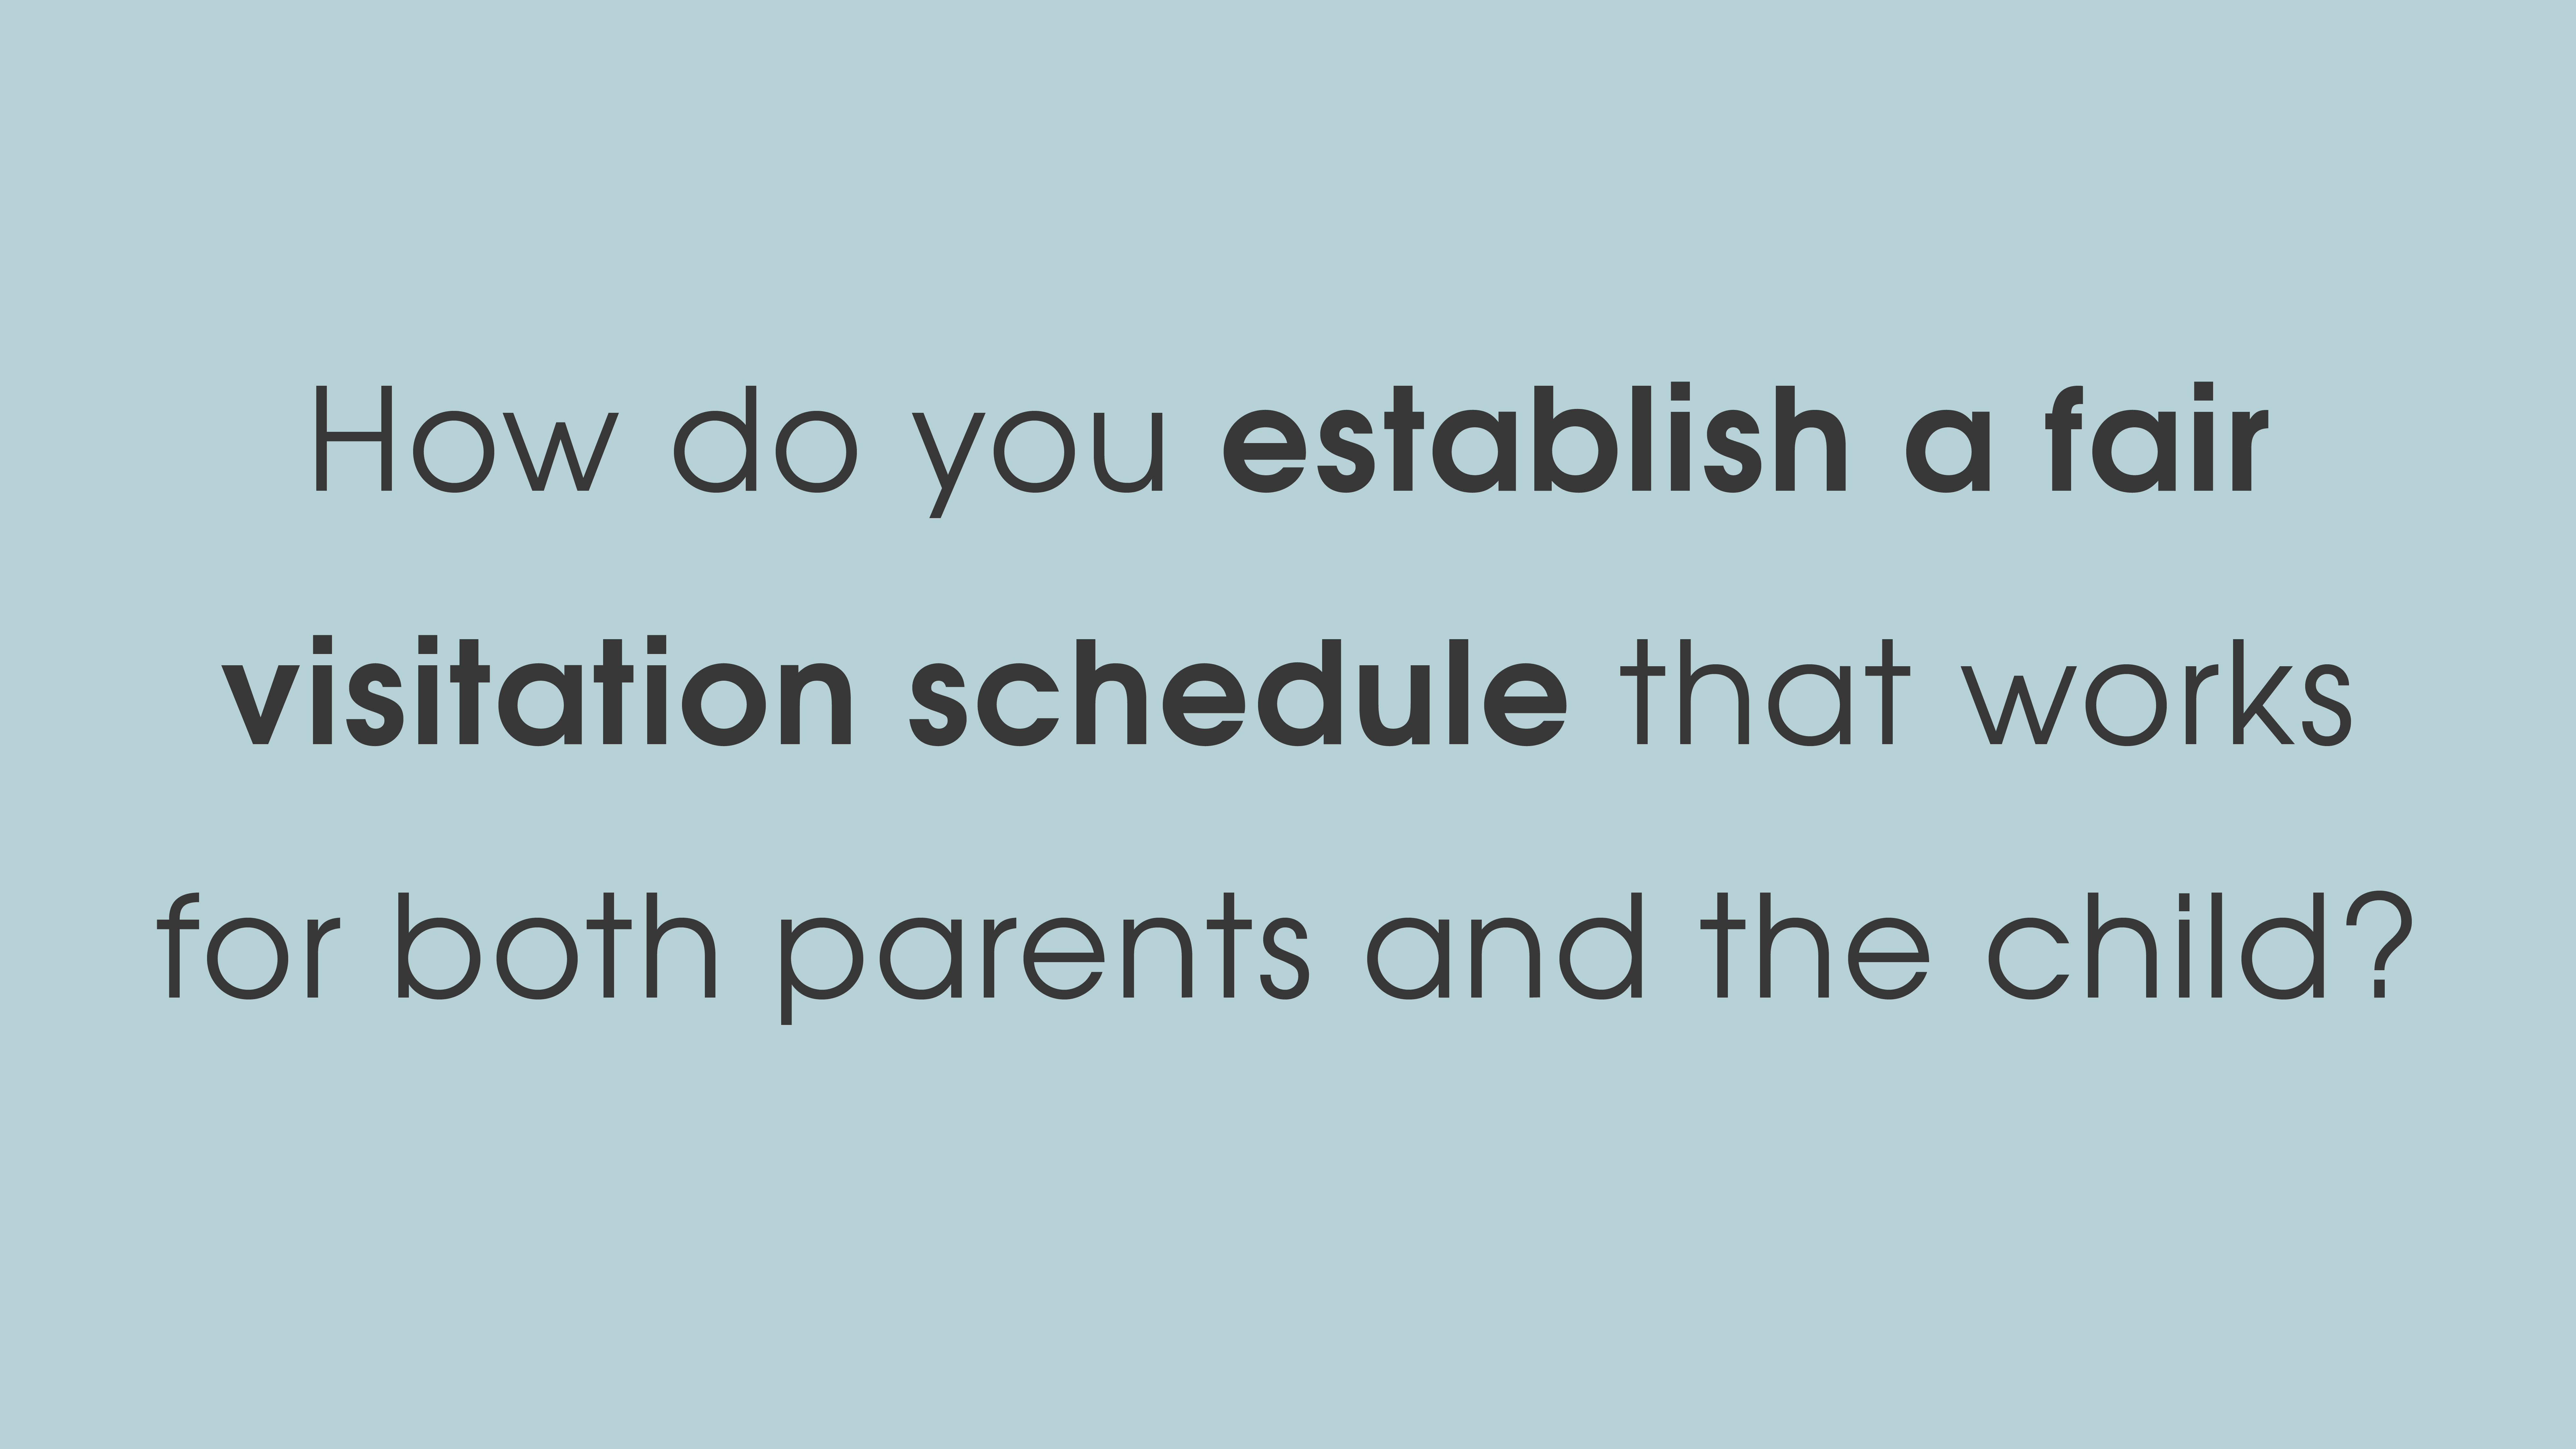 How do you establish a fair visitation schedule that works for both parents and the child?